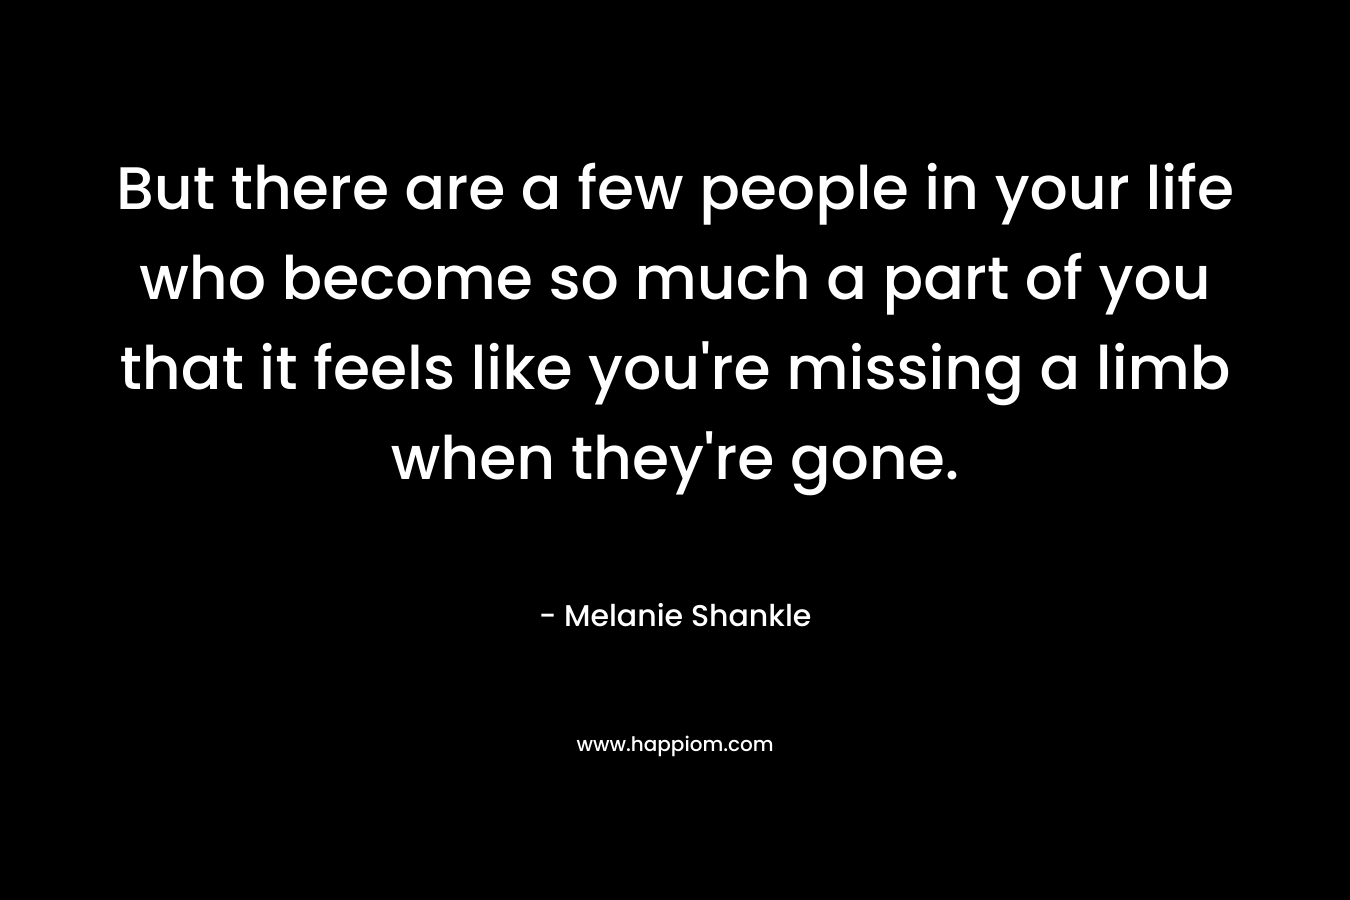 But there are a few people in your life who become so much a part of you that it feels like you’re missing a limb when they’re gone. – Melanie Shankle